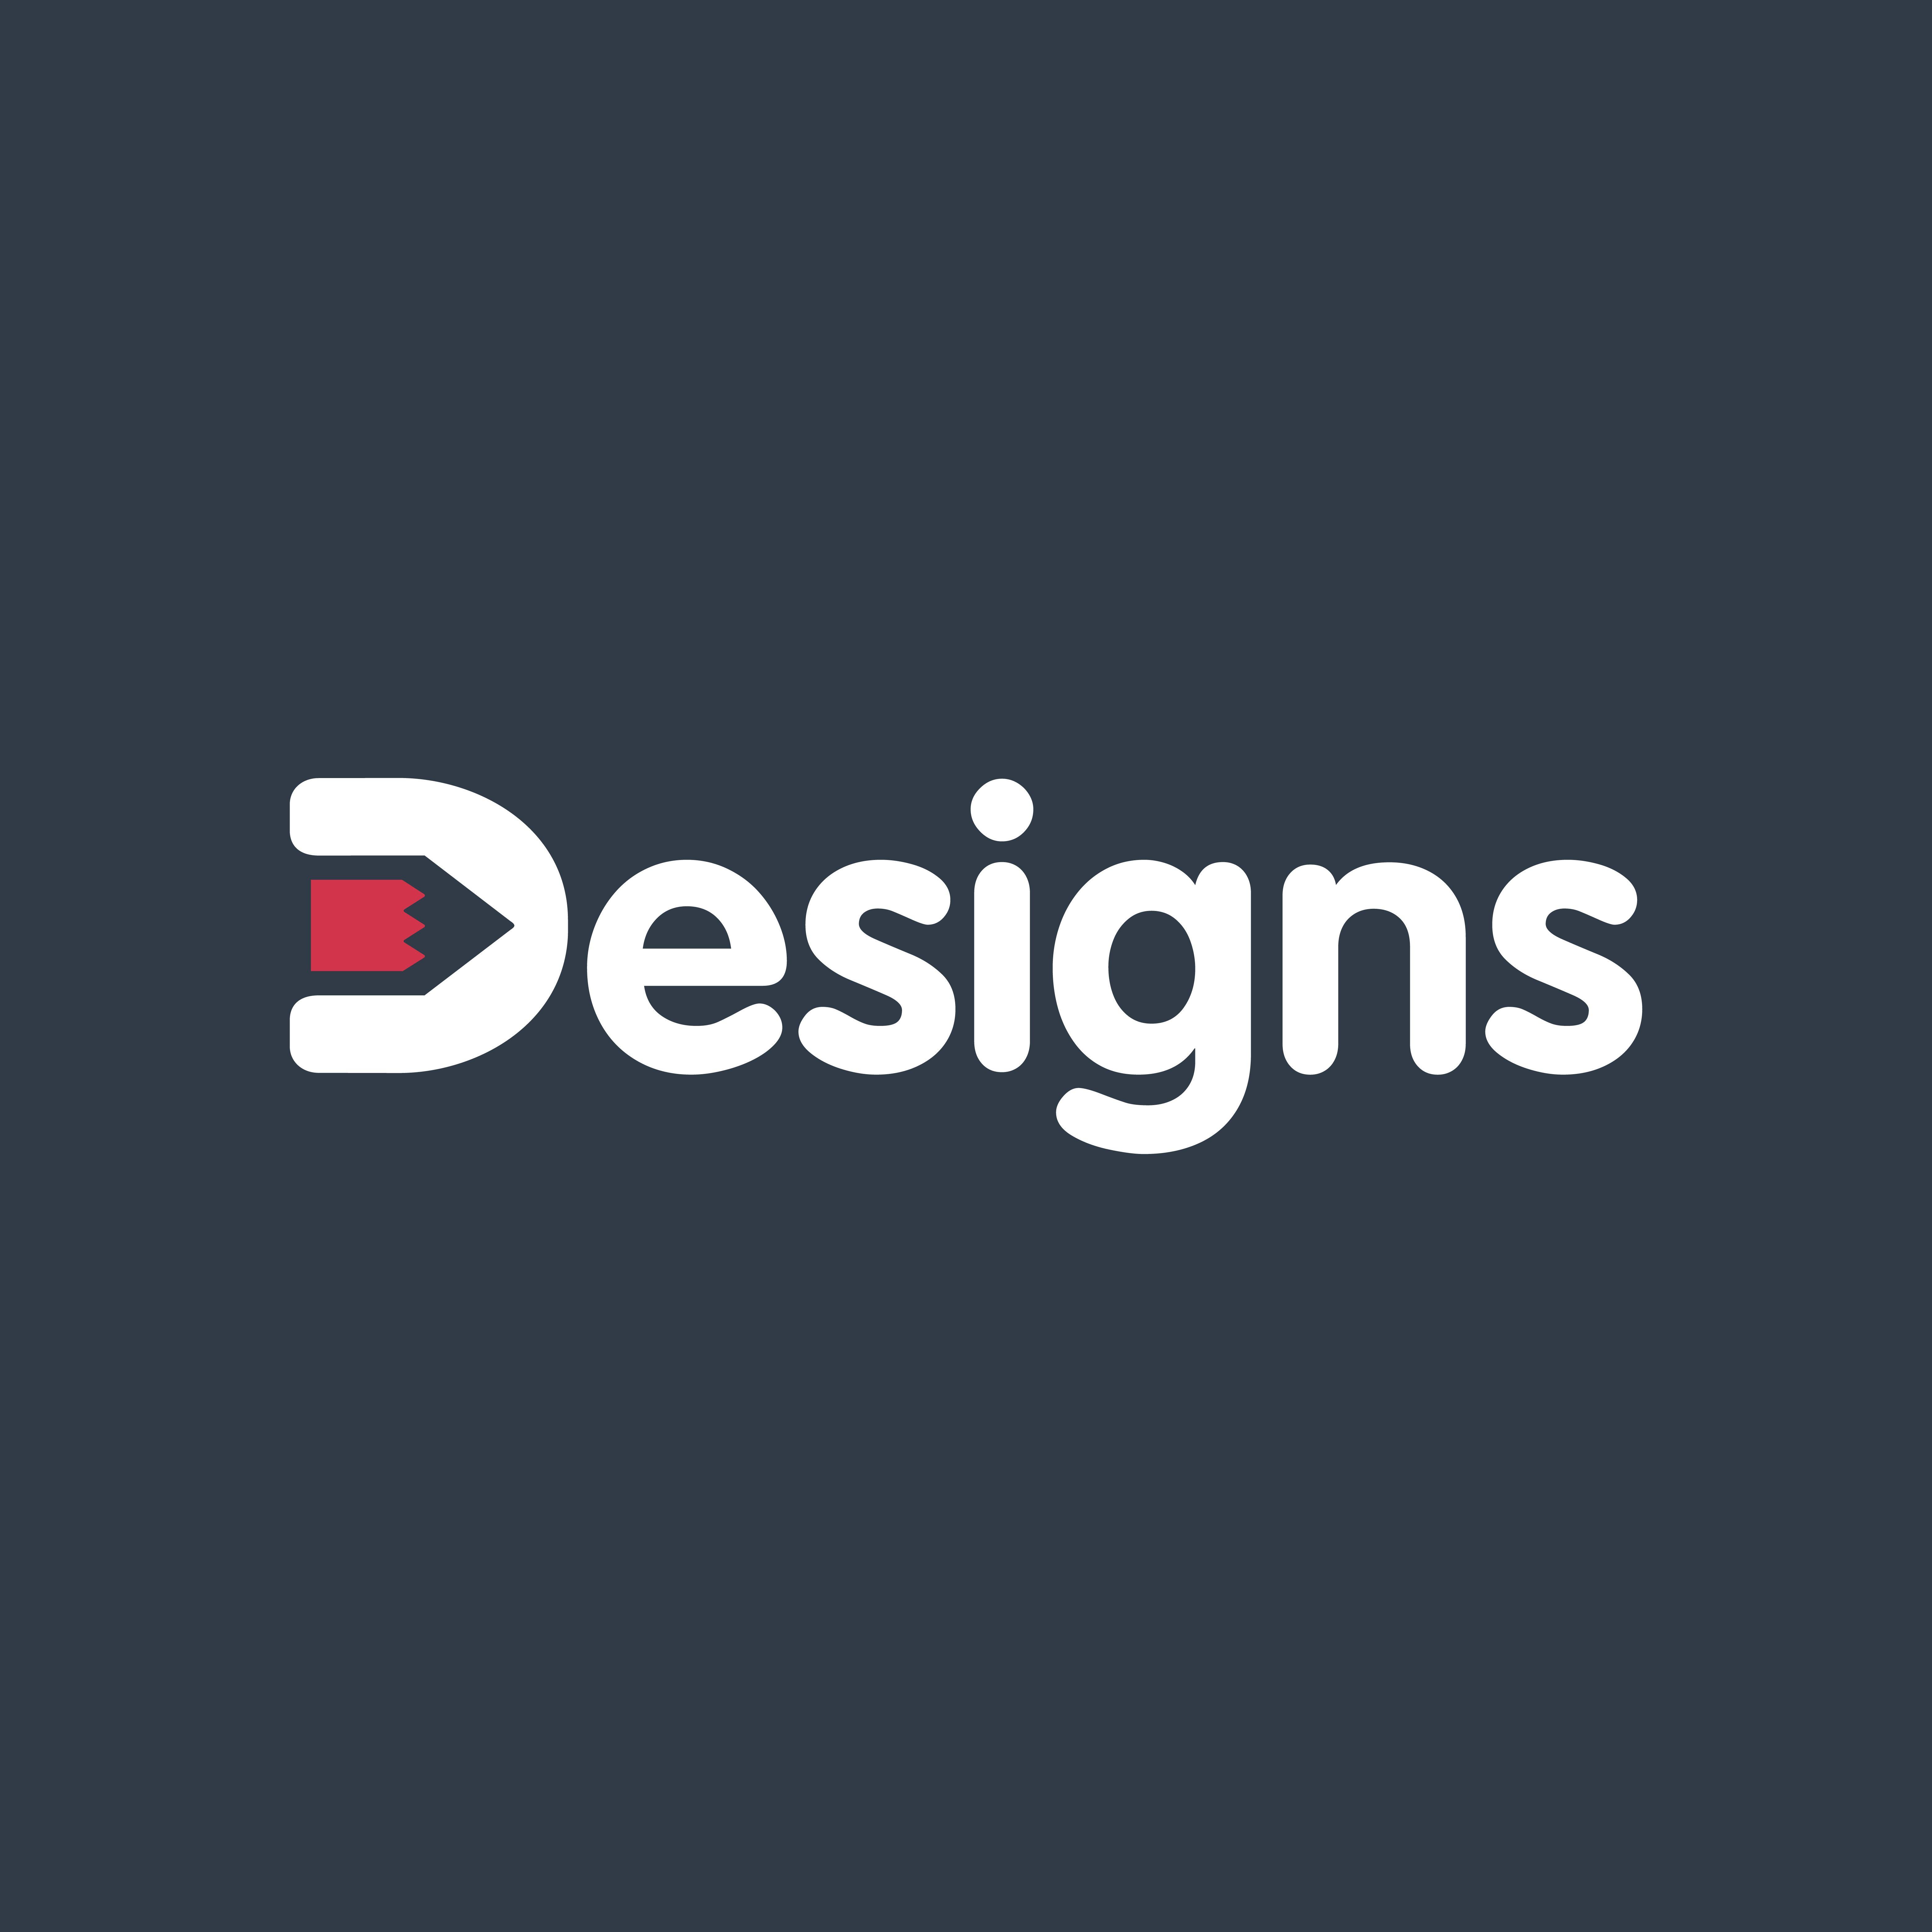 Designers Logo - Templates, Themes, Logos, Fonts And More